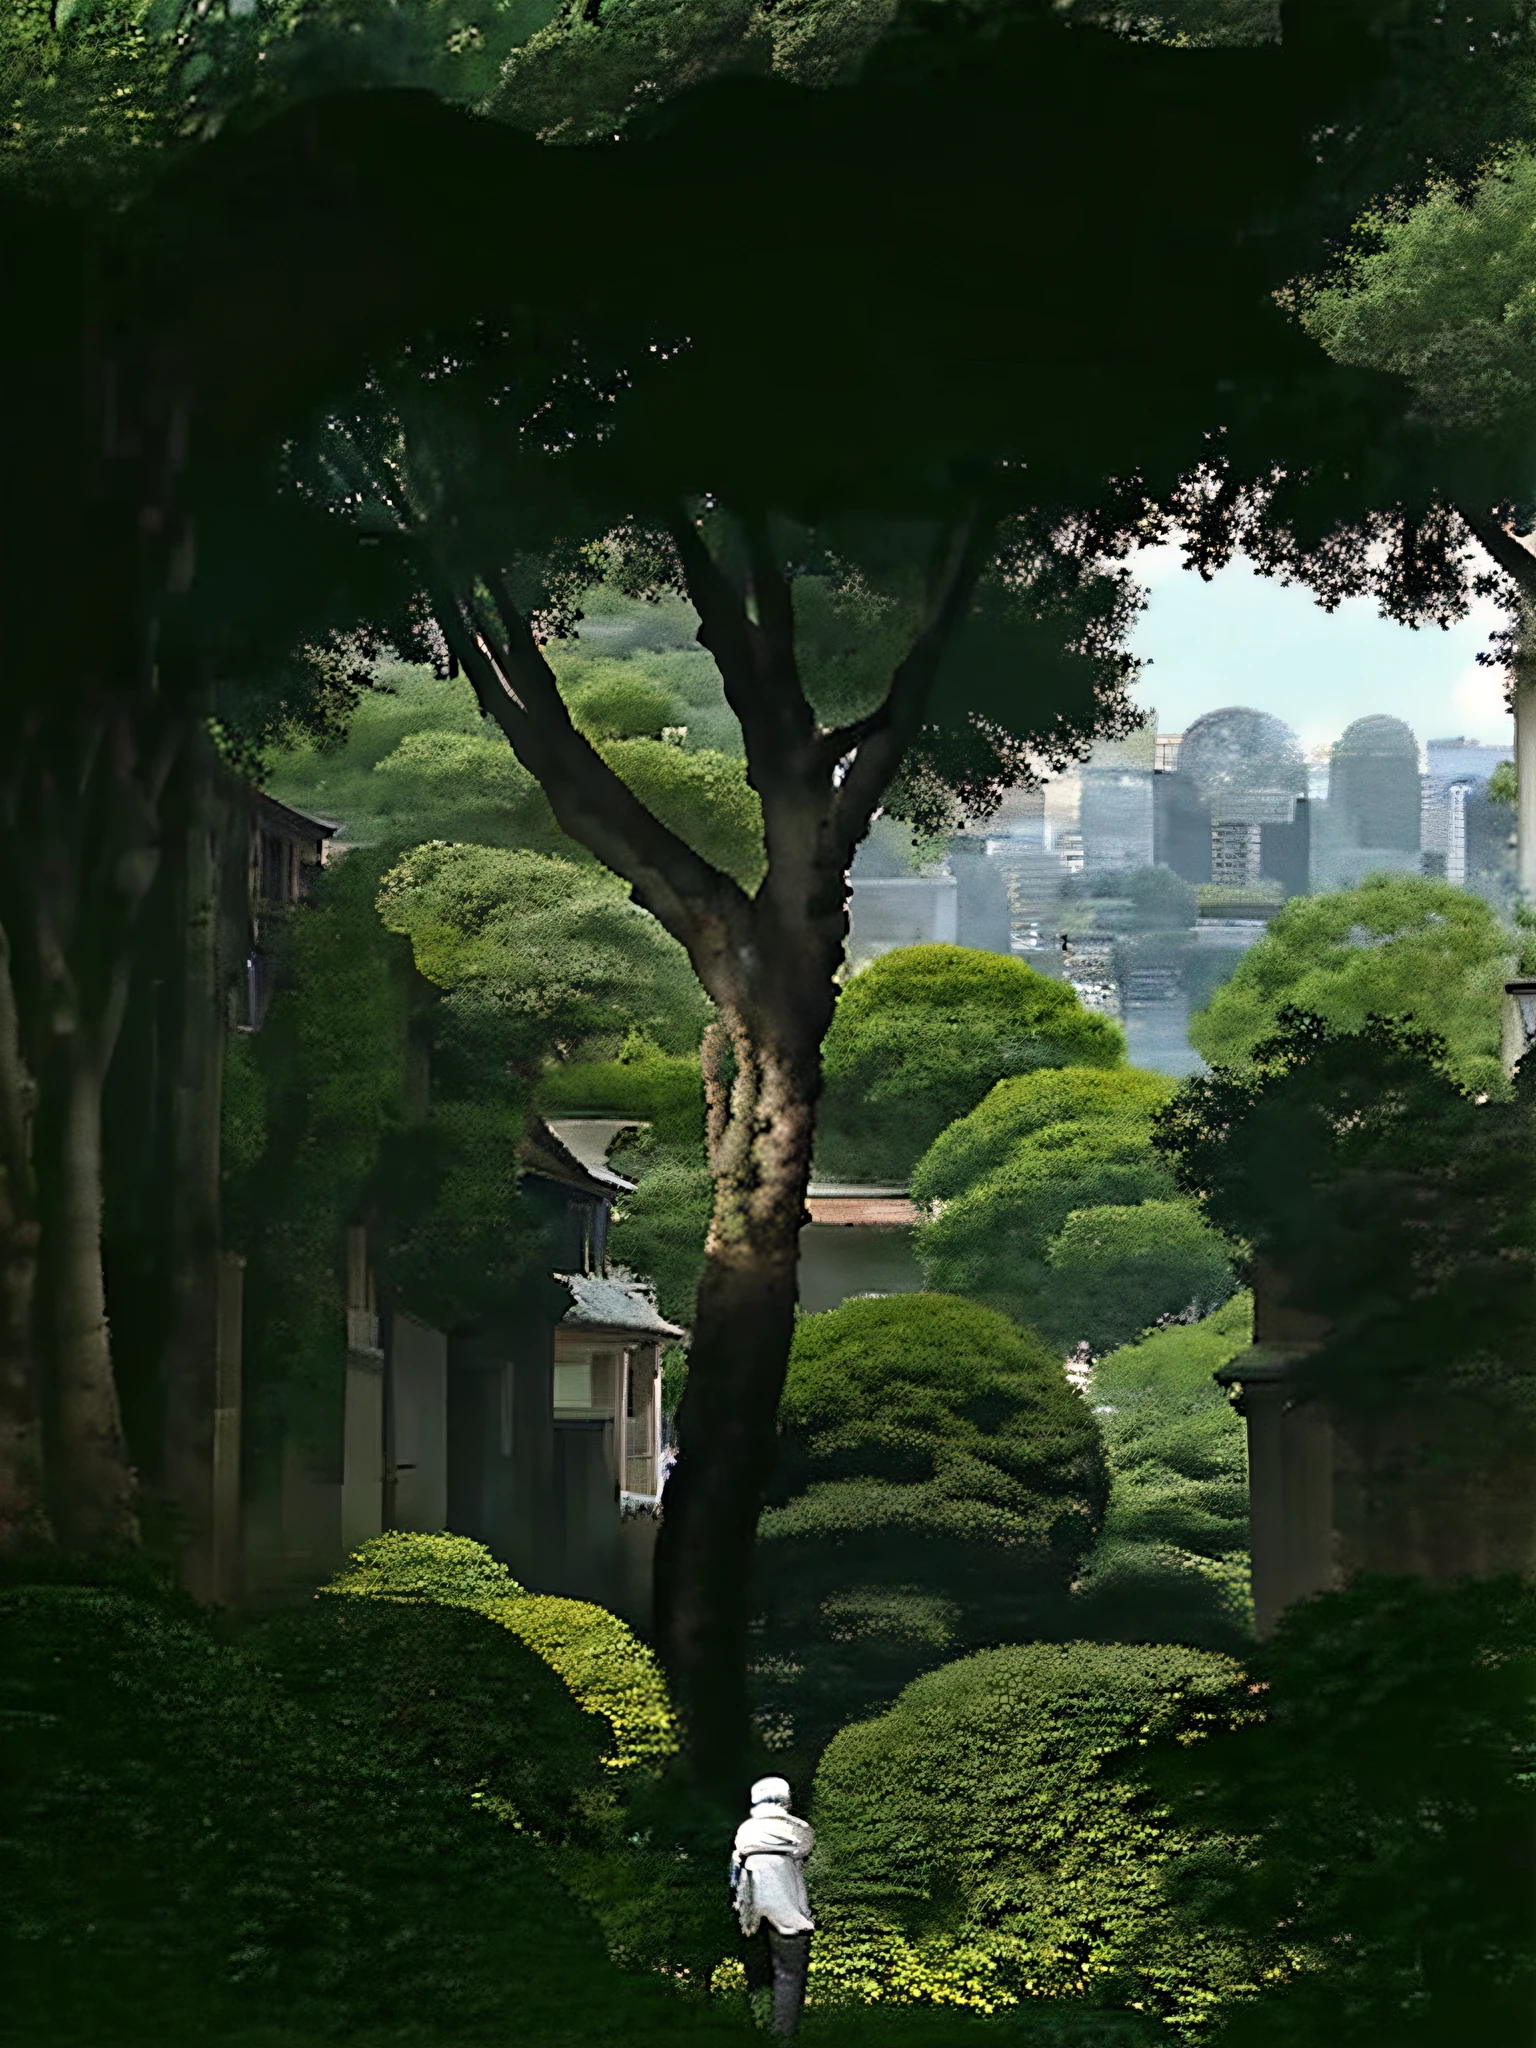 The expansive city square, lined with verdant trees and plants, a man carrying a suitcase, giant trees standing in the street, parks and woods in the distance blending in with the surrounding buildings, overlooking the panoramic view of the city.